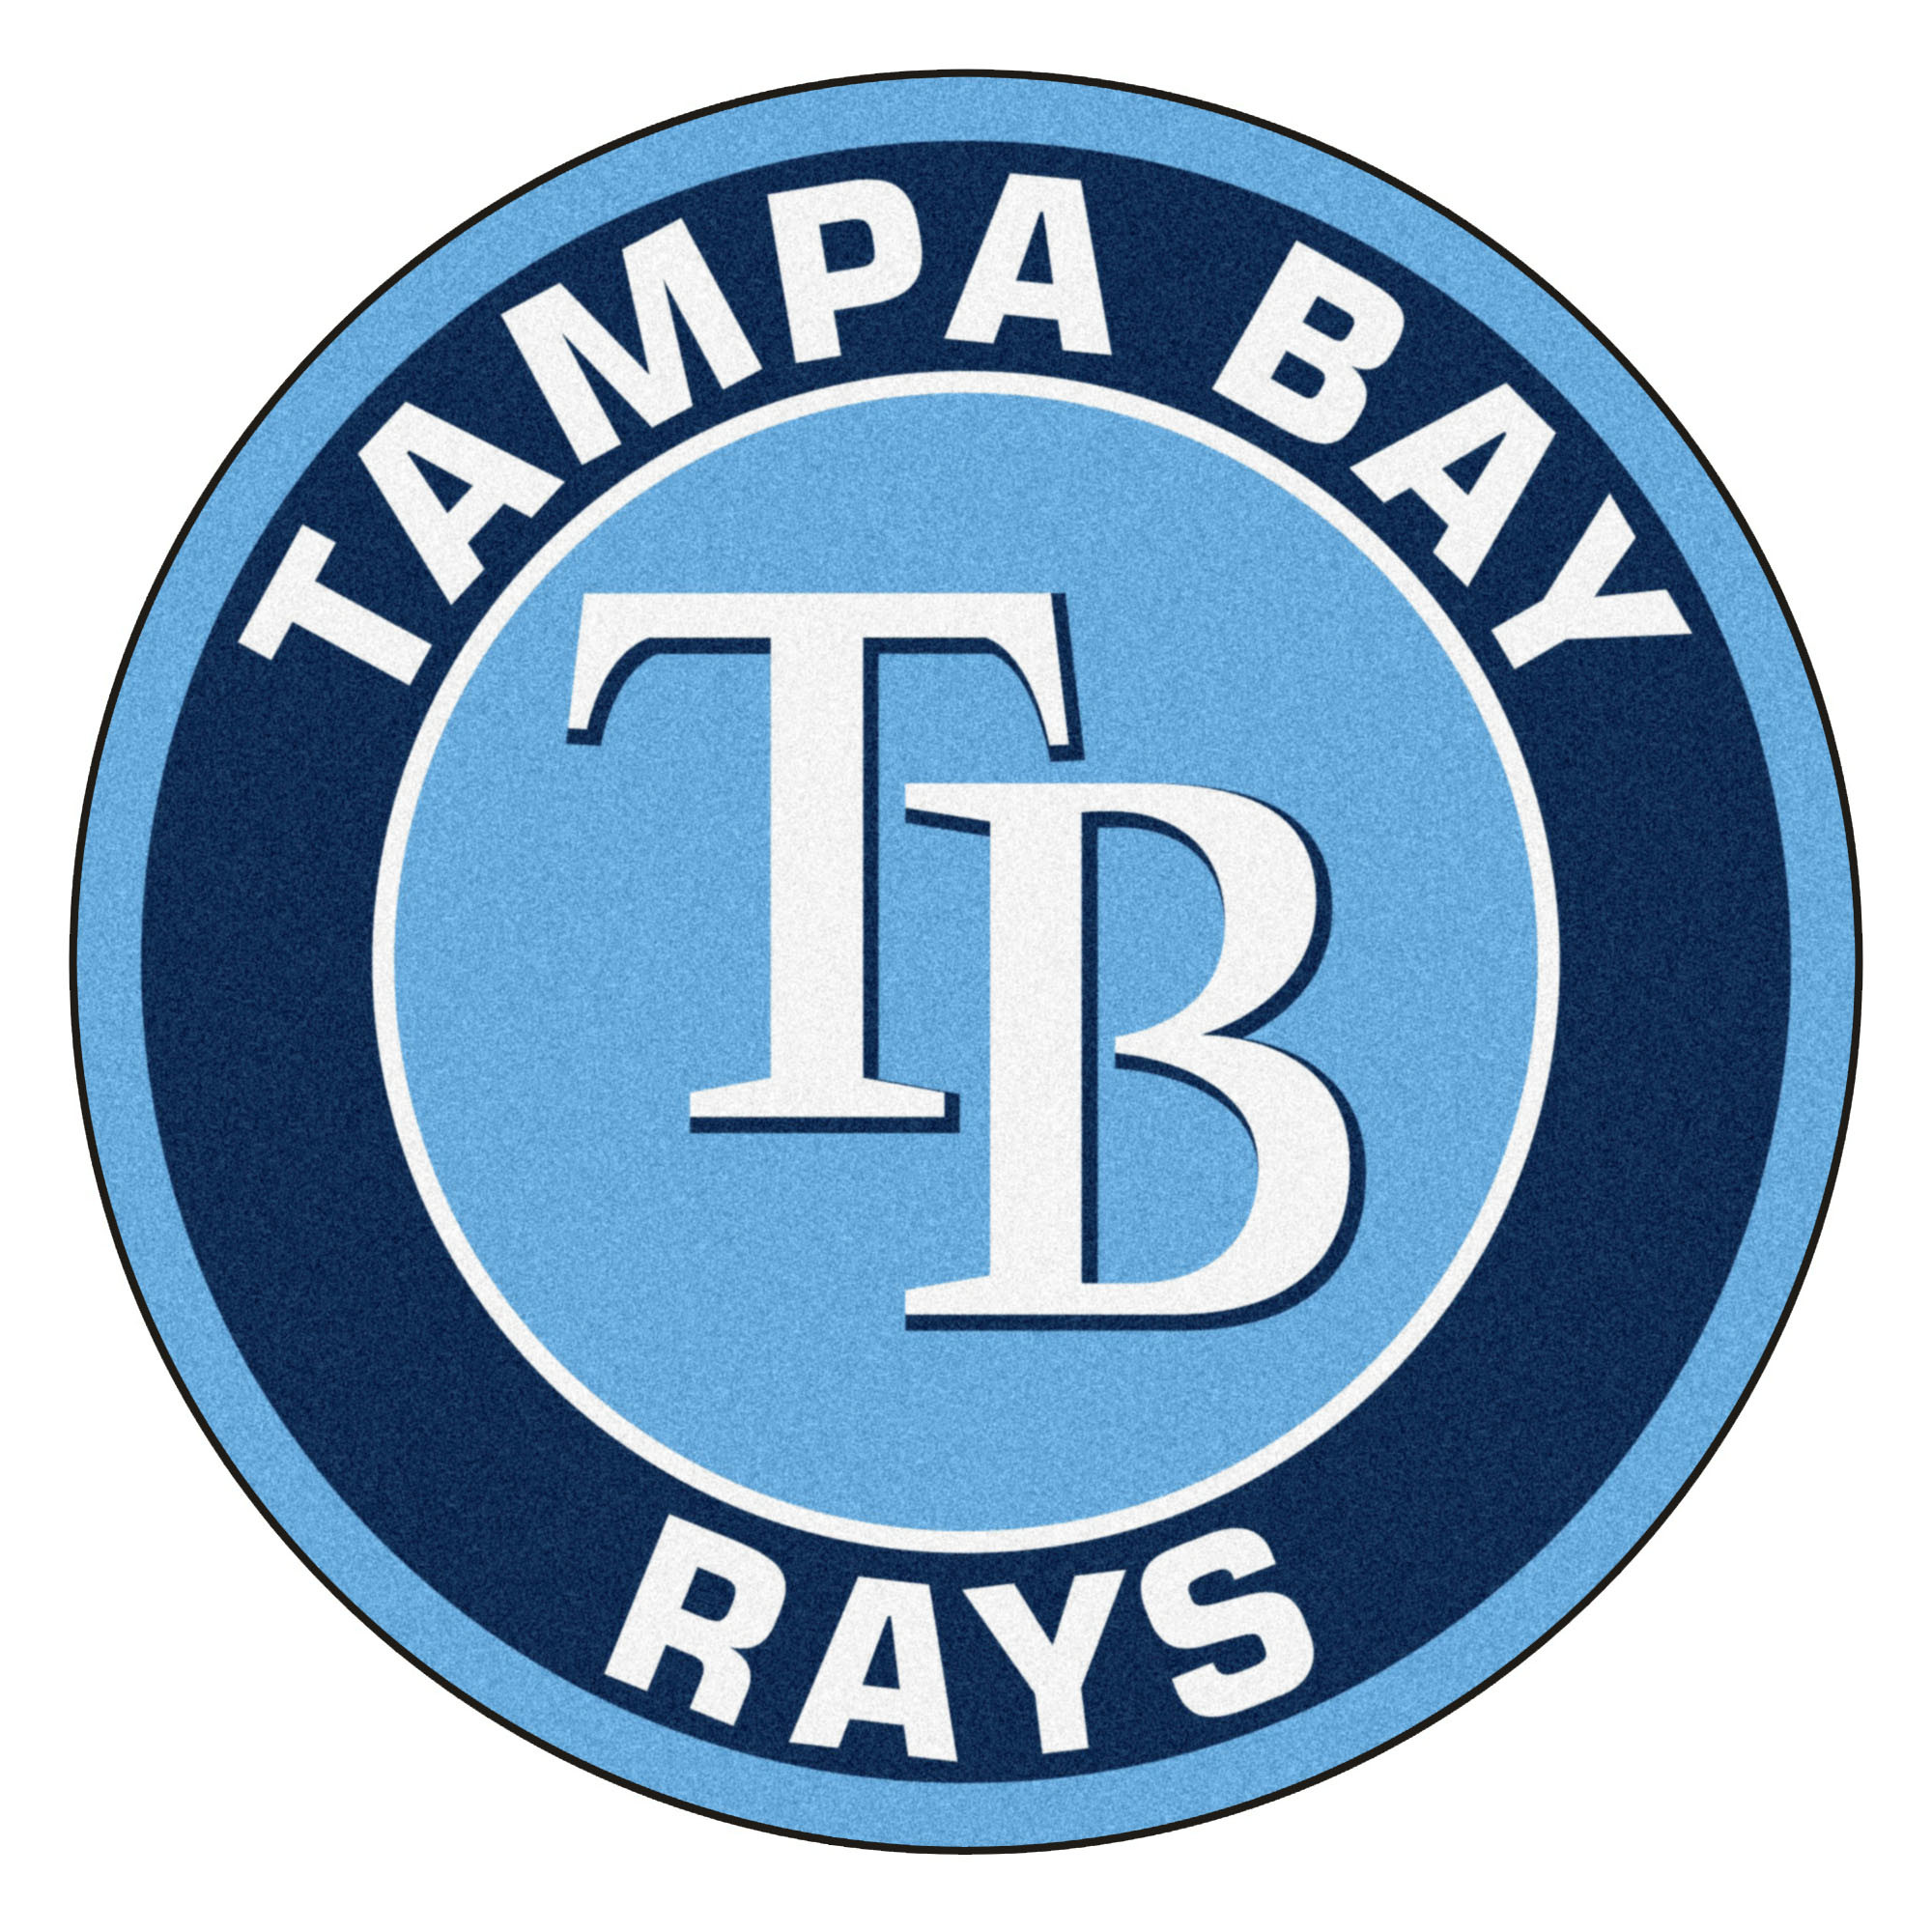 Download wallpapers Tampa Bay Rays golden logo MLB blue metal  background american baseball team Major League Baseball Tampa Bay Rays  logo baseball USA for desktop with resolution 2880x1800 High Quality HD  pictures